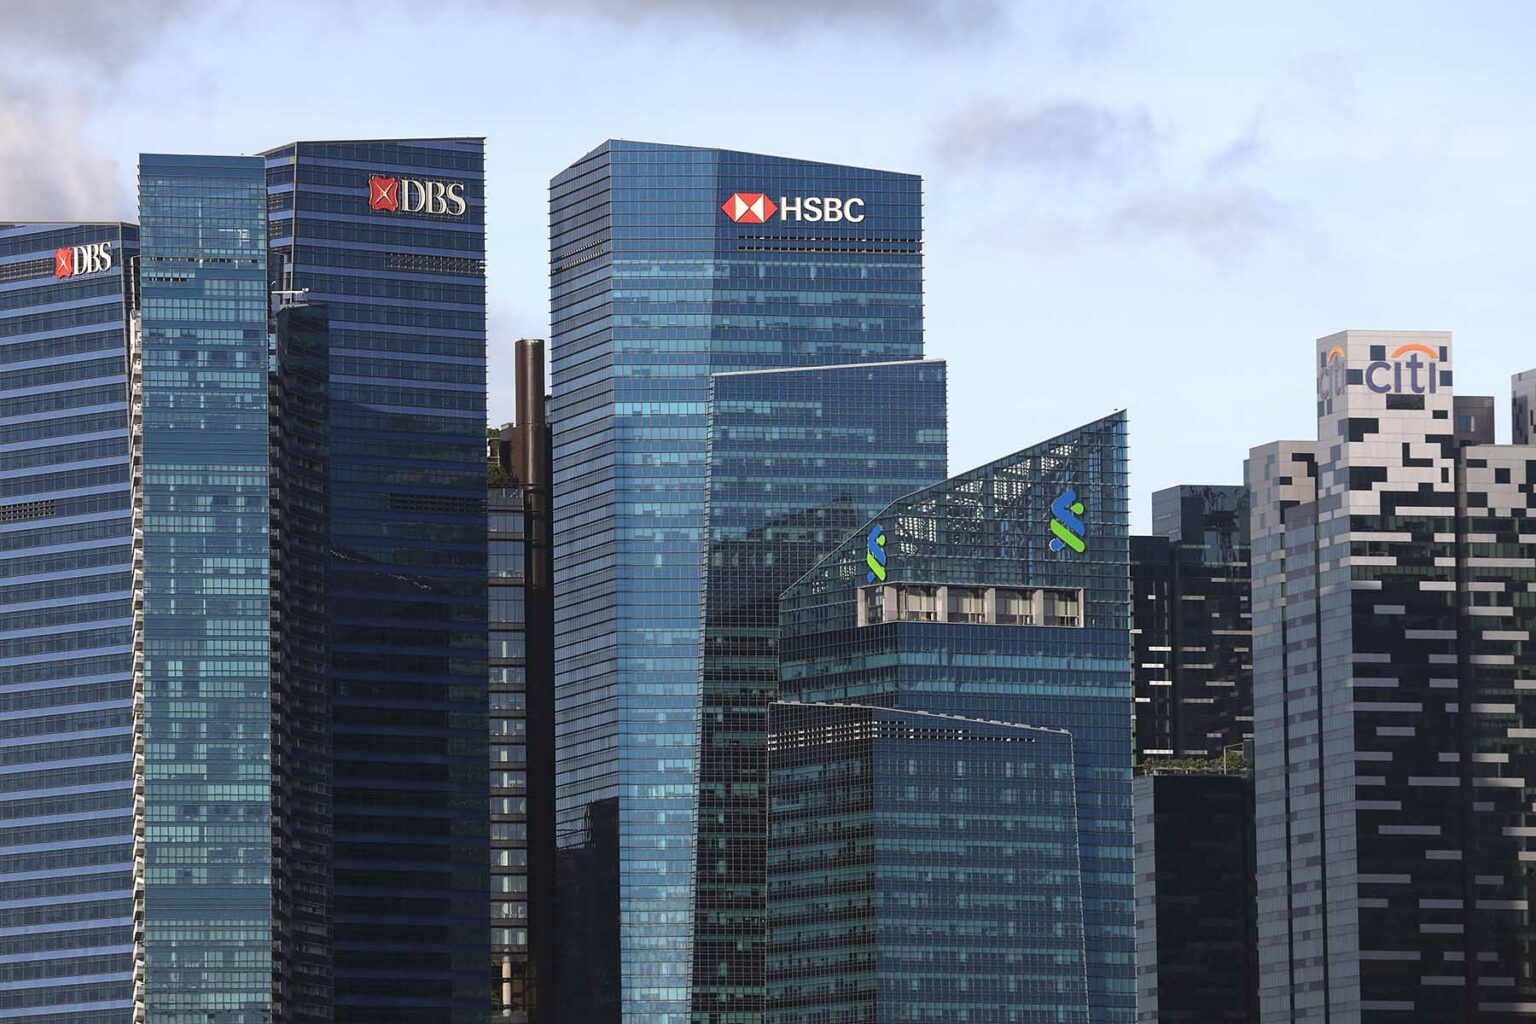 (L-R) The DBS Bank Ltd. , HSBC Holdings Plc, the Standard Chartered Plc and the Citigroup Inc. logos are displayed atop of a building in the central business district of Singapore.